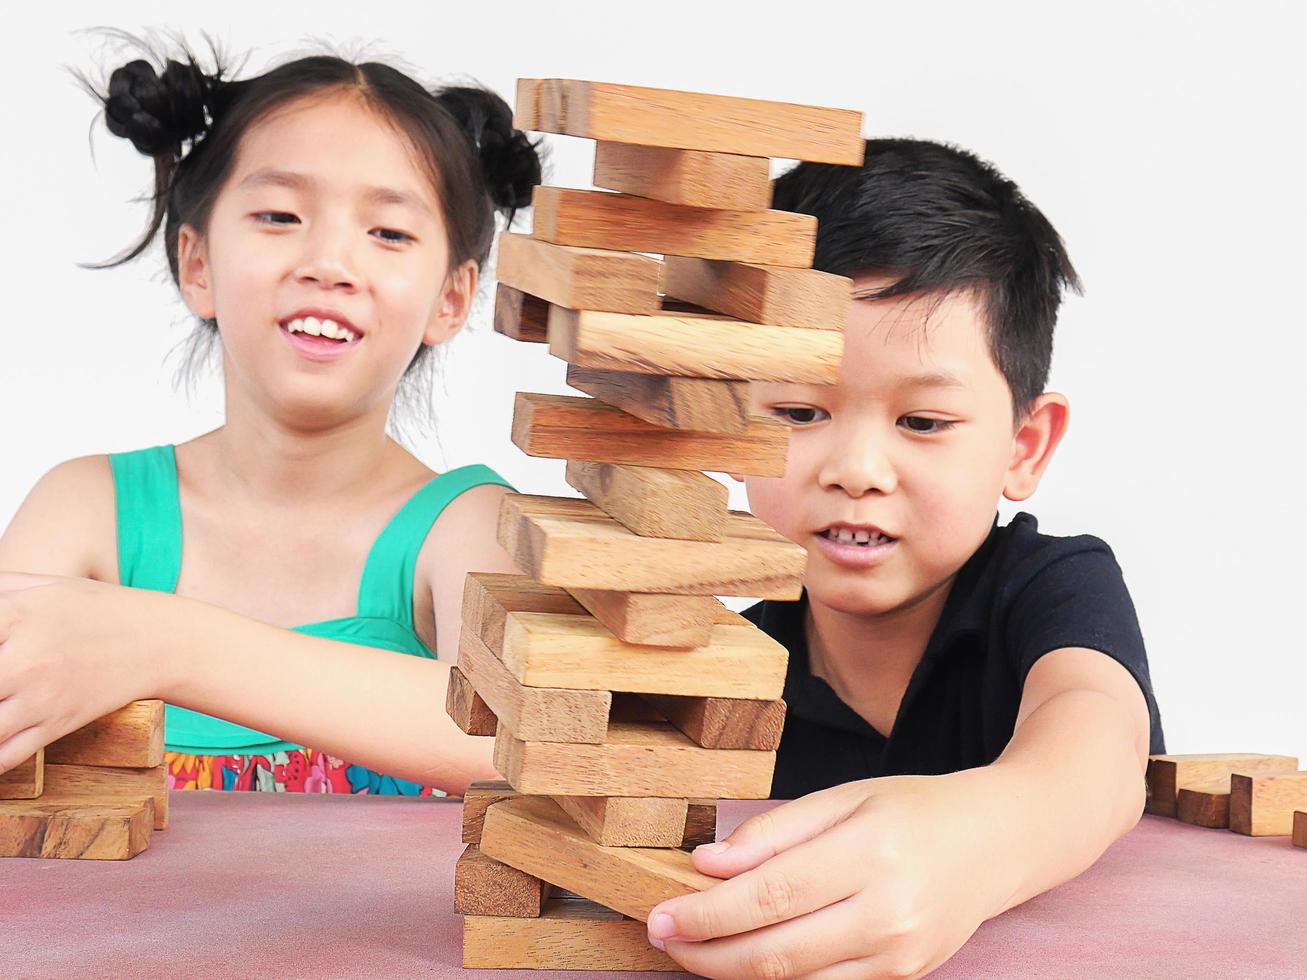 Children are playing a wood blocks tower game for practicing their physical and mental skill. Photo focus on hands Boy